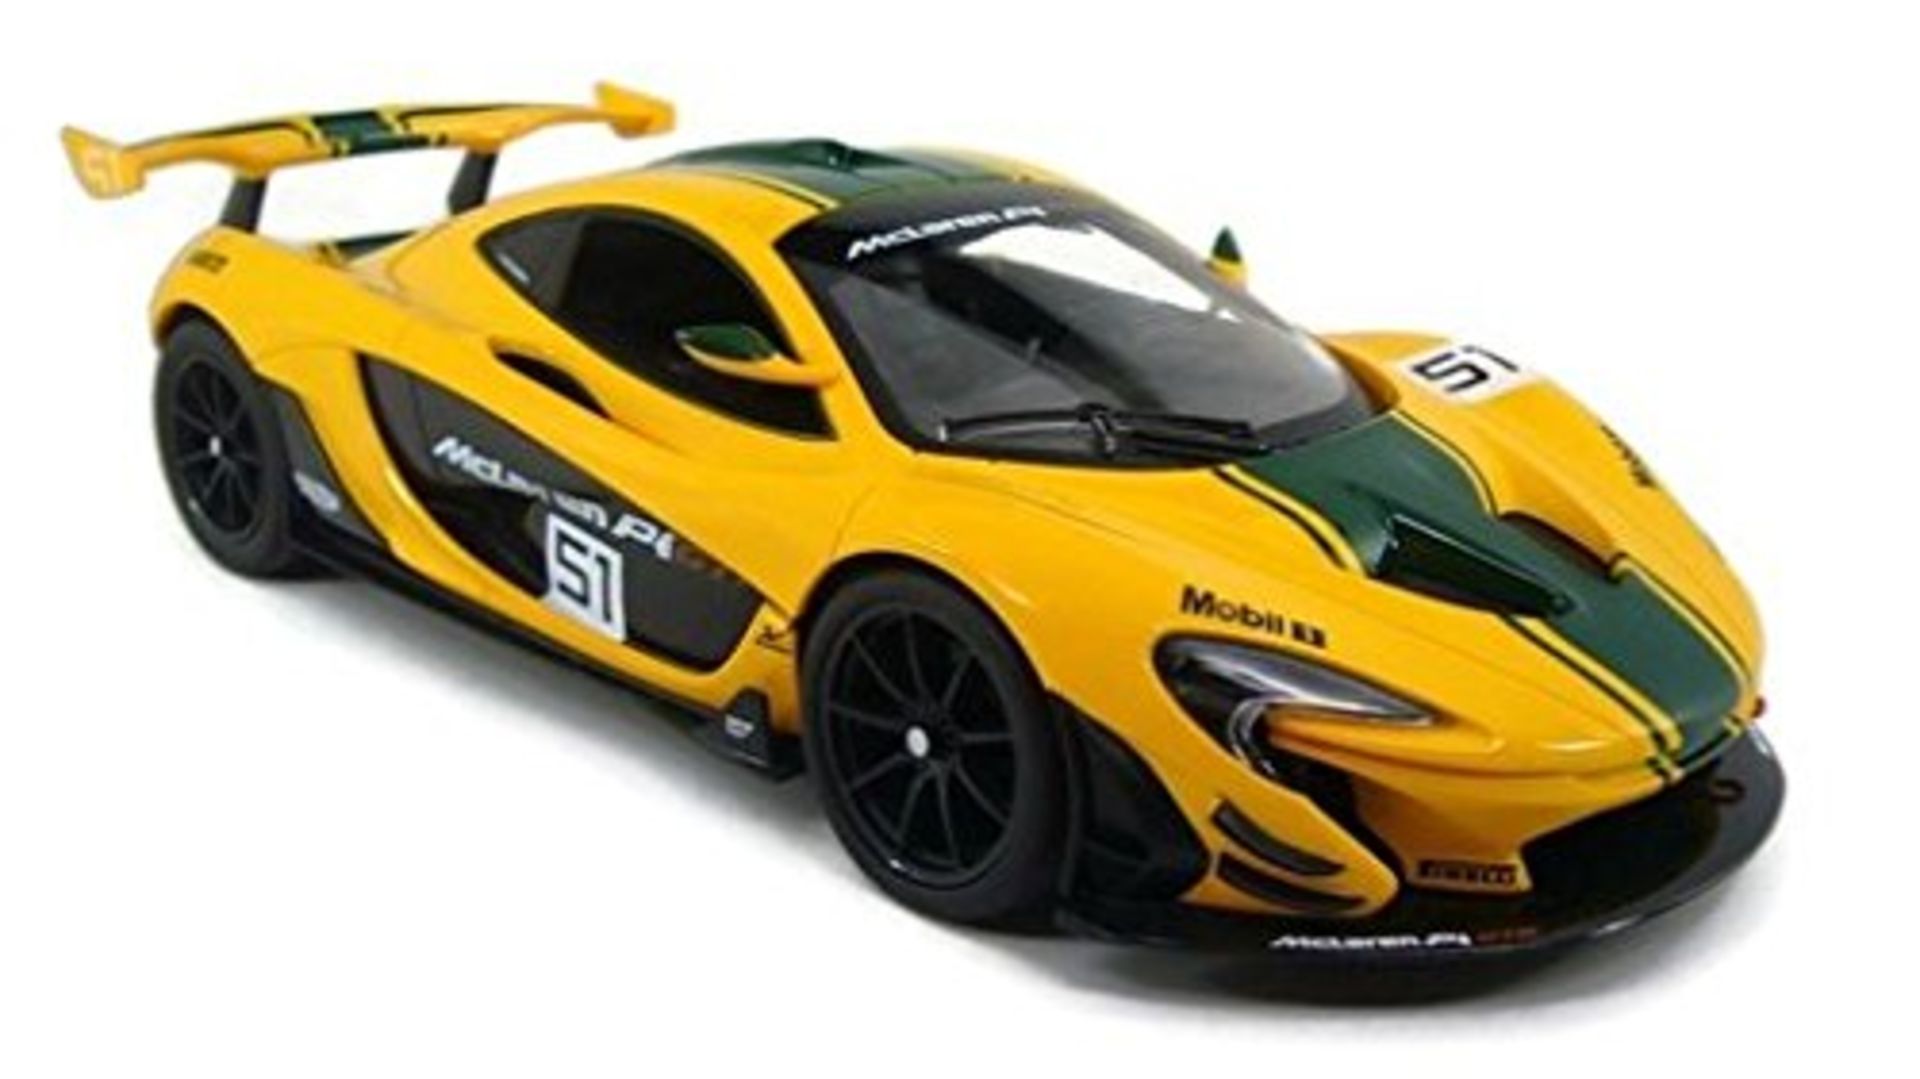 V *TRADE QTY* Brand New Officially Licensed 1/14 Scale McLaren P1 GTR Full Function Remote Control